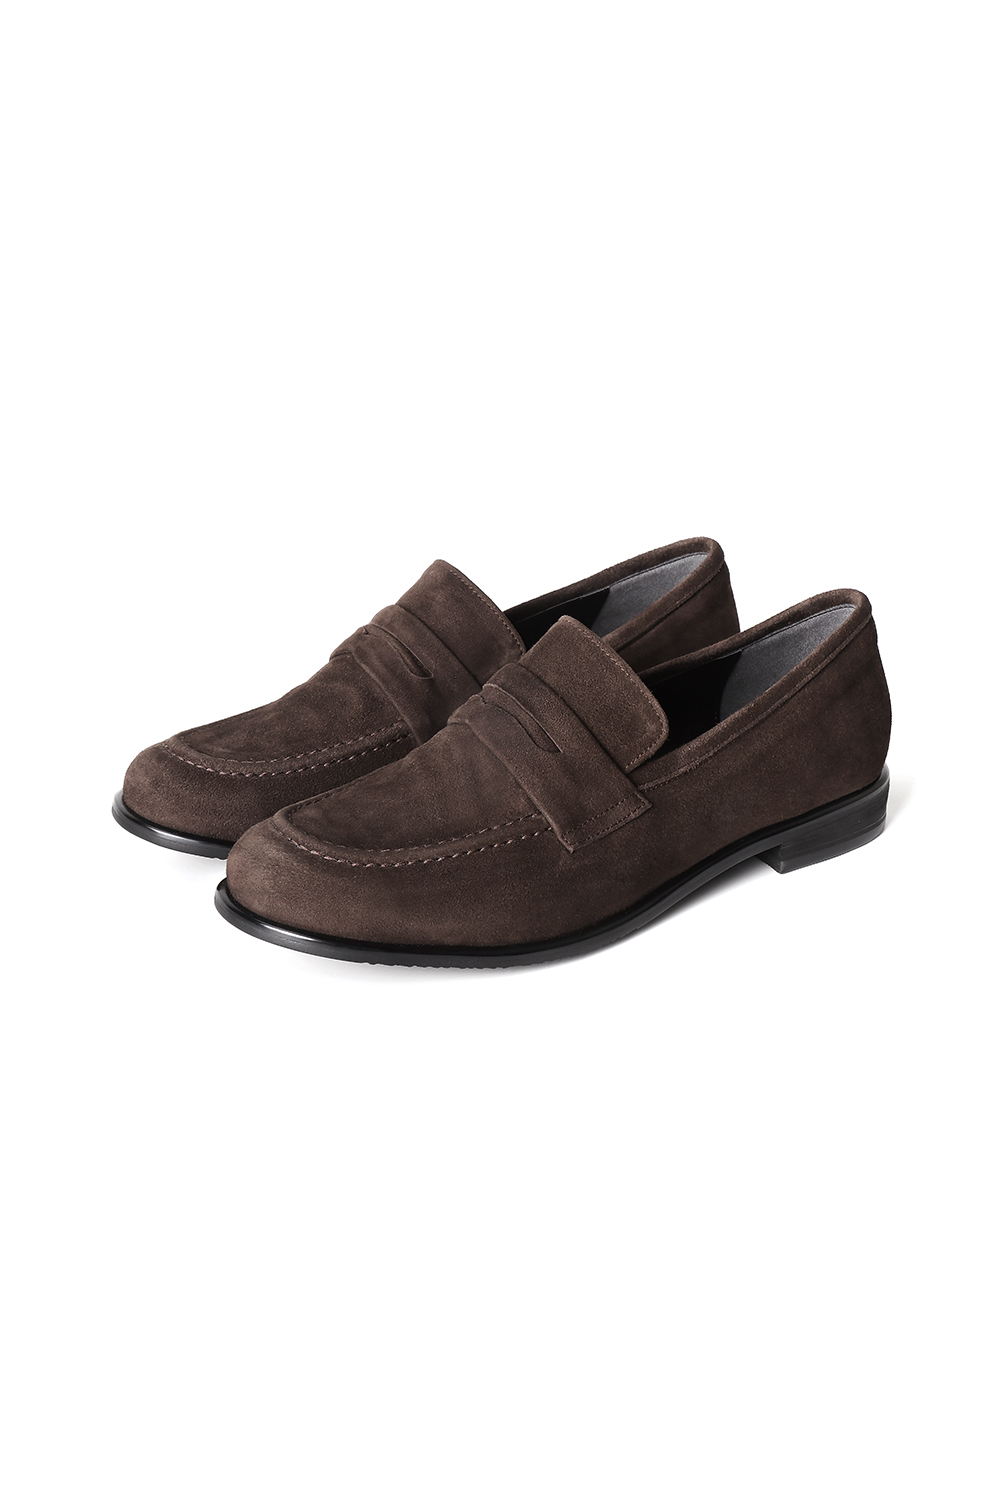 PALE PENNY LOAFER [BROWN]